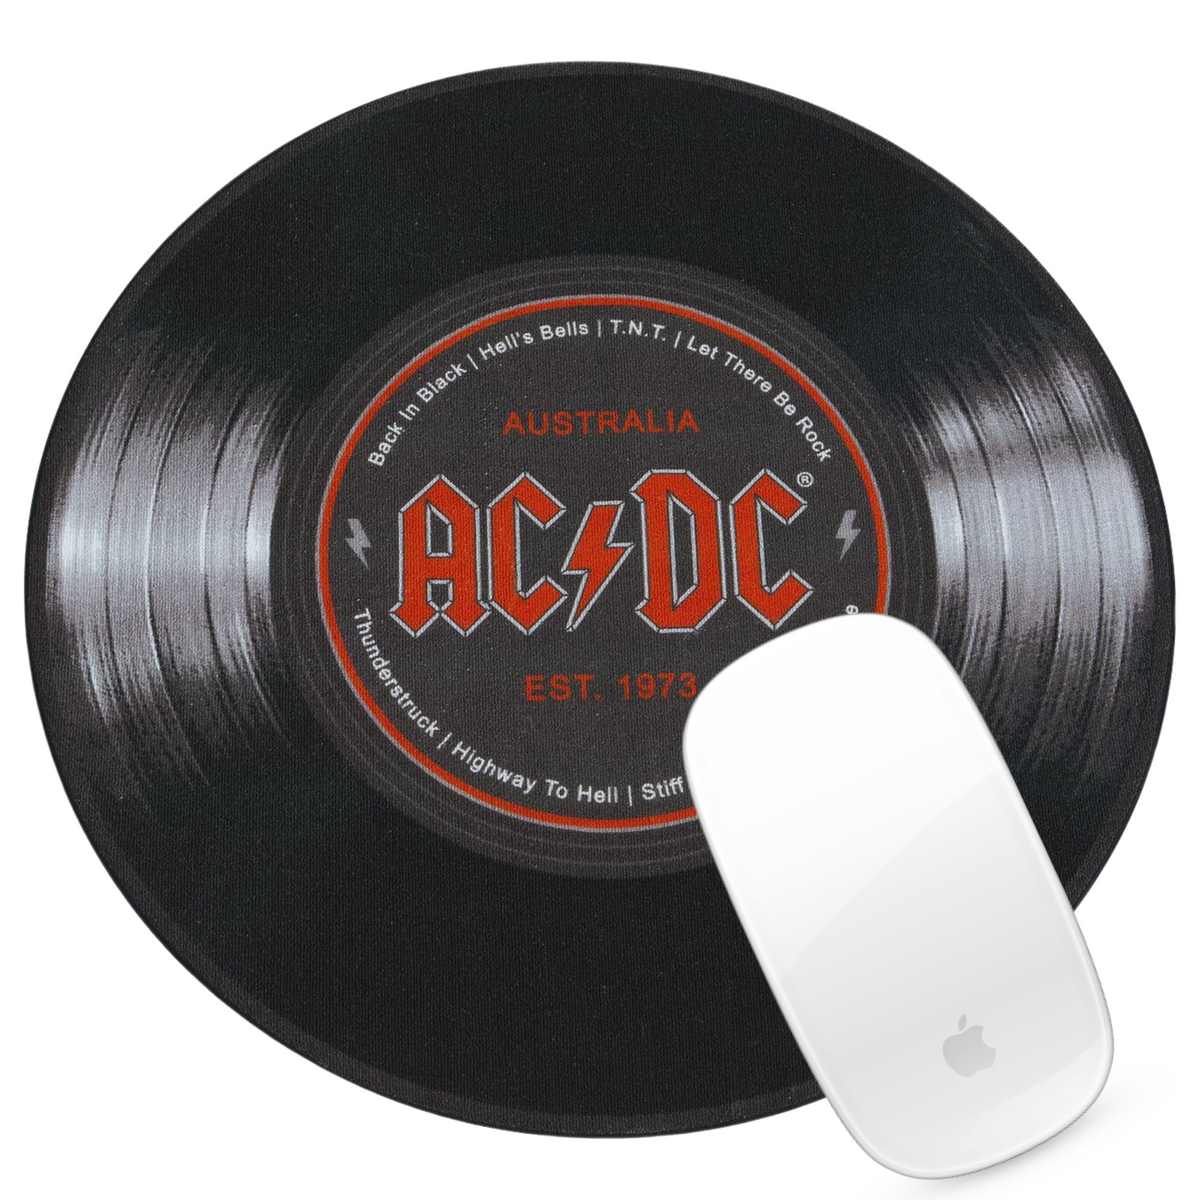 MOUSE PAD-ACDC